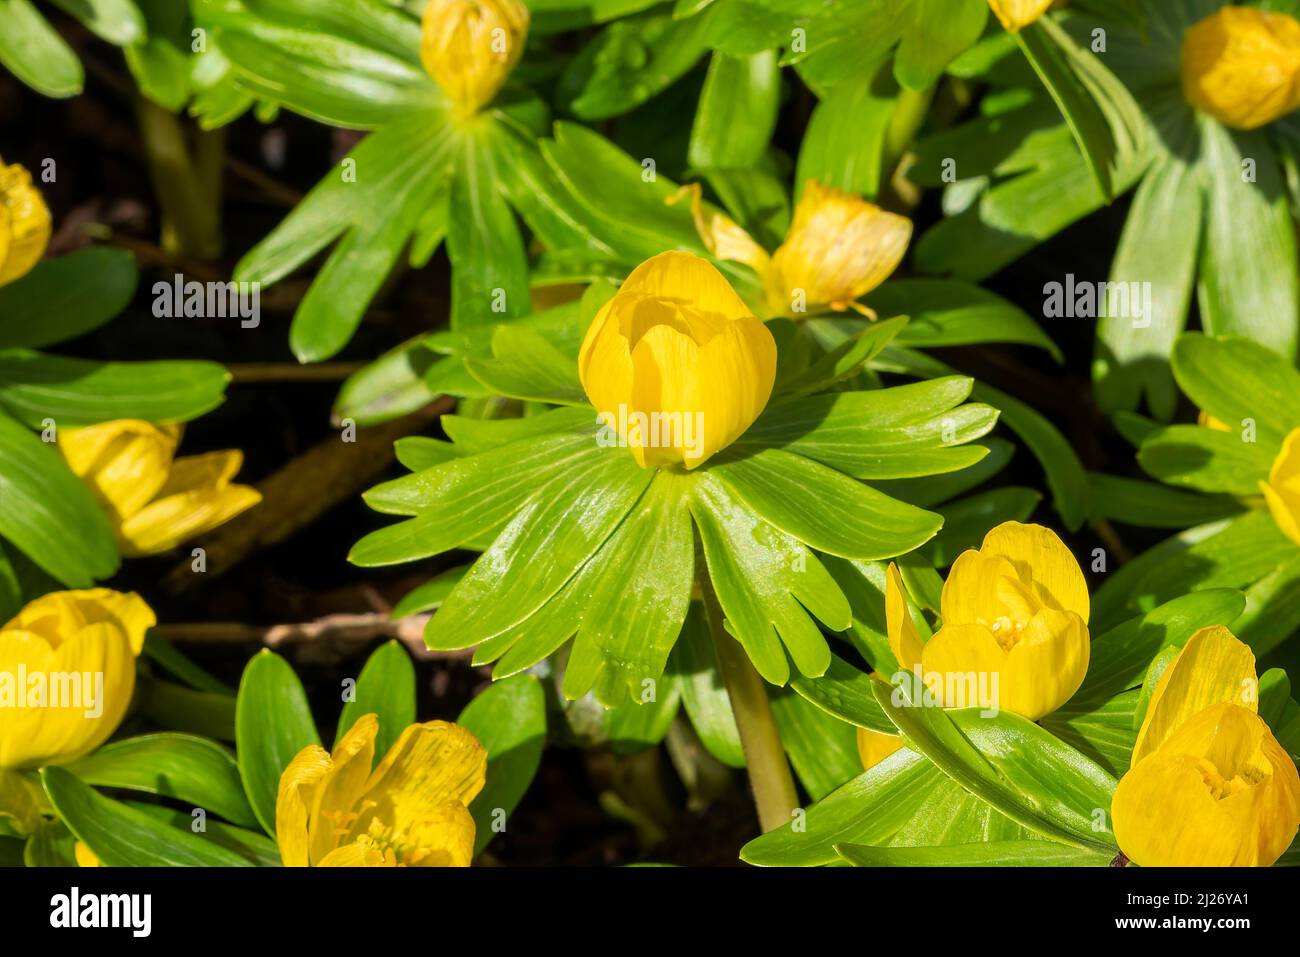 Eranthis hyemalis a late winter spring flowering plant with a yellow wintertime flower commonly known as winter aconite, stock photo image Stock Photo